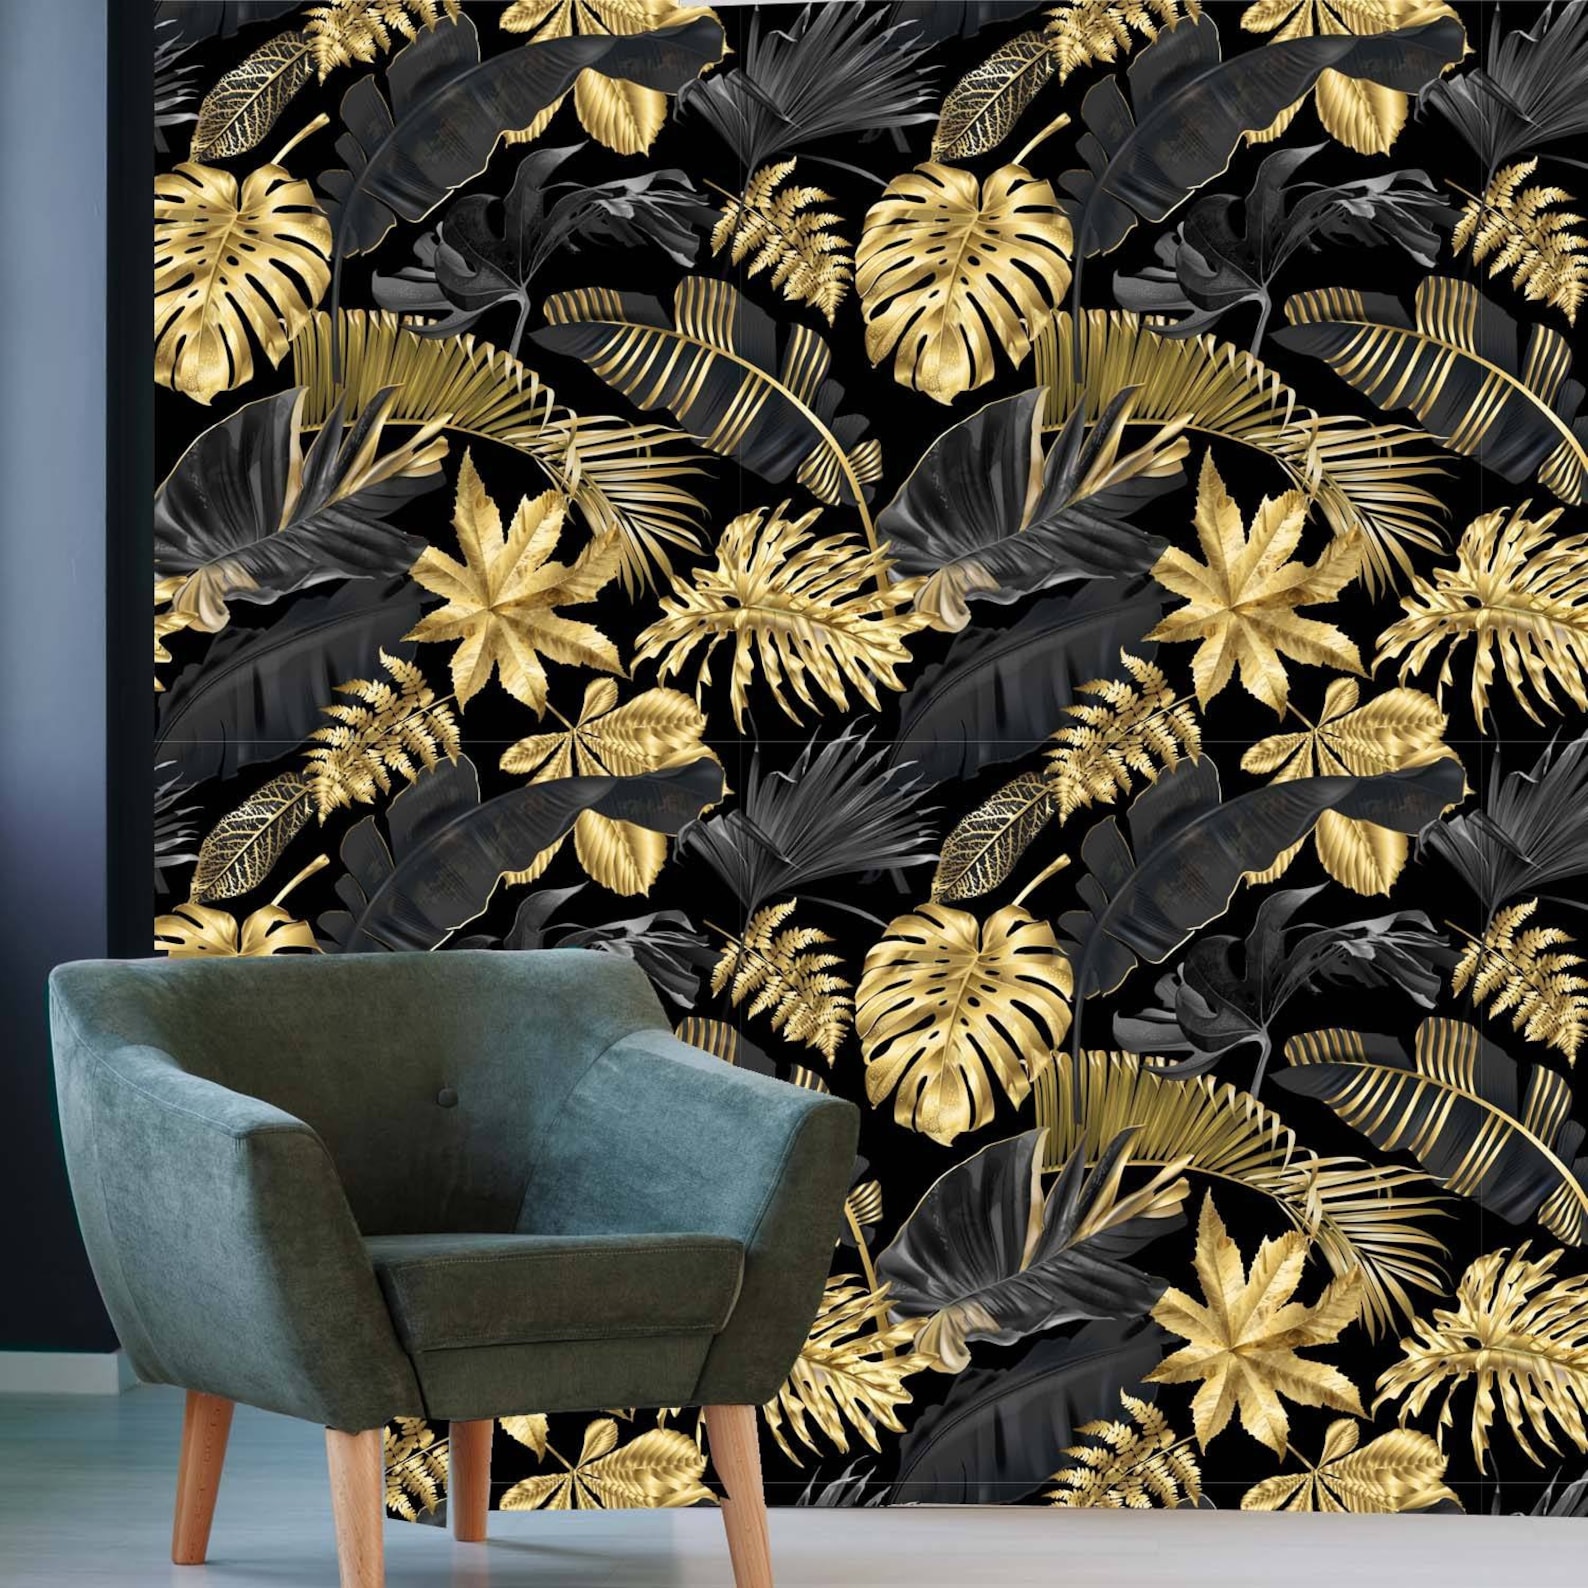 Tropical Leaves Gold Black 3D Wallpaper Traditional Non woven | Etsy